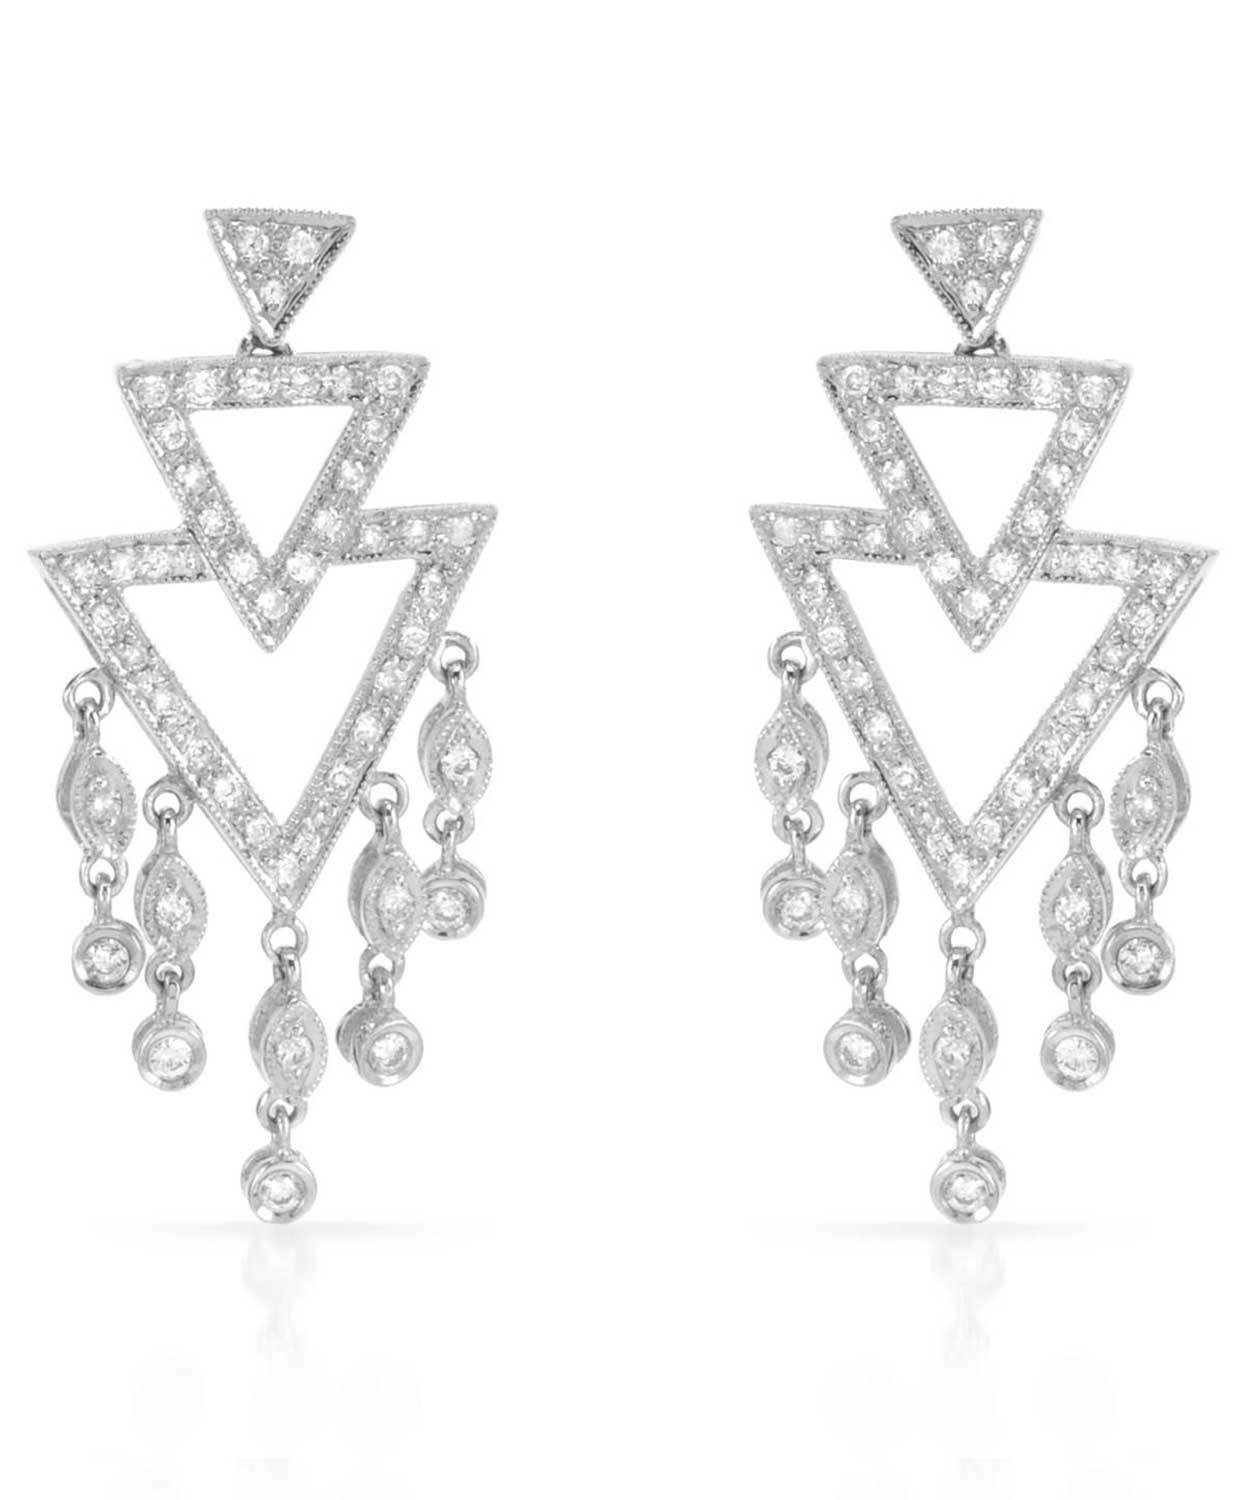 0.87 ctw Diamond 18k White Gold Contemporary Chandelier Earrings View 1